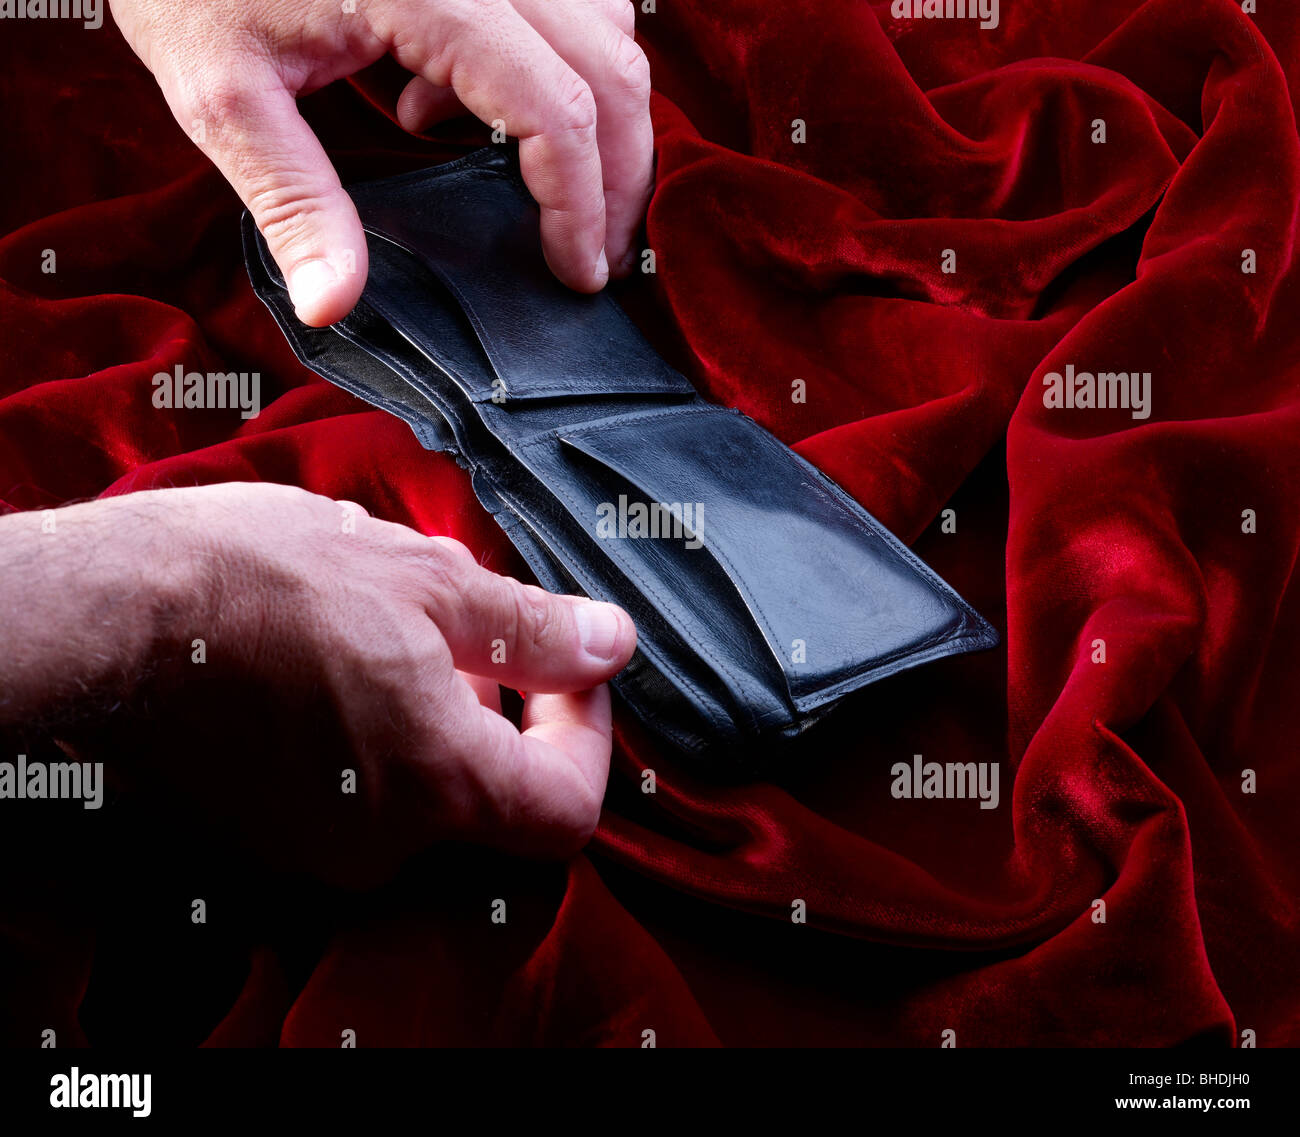 Hands opening empty leather wallet on red velvet Stock Photo